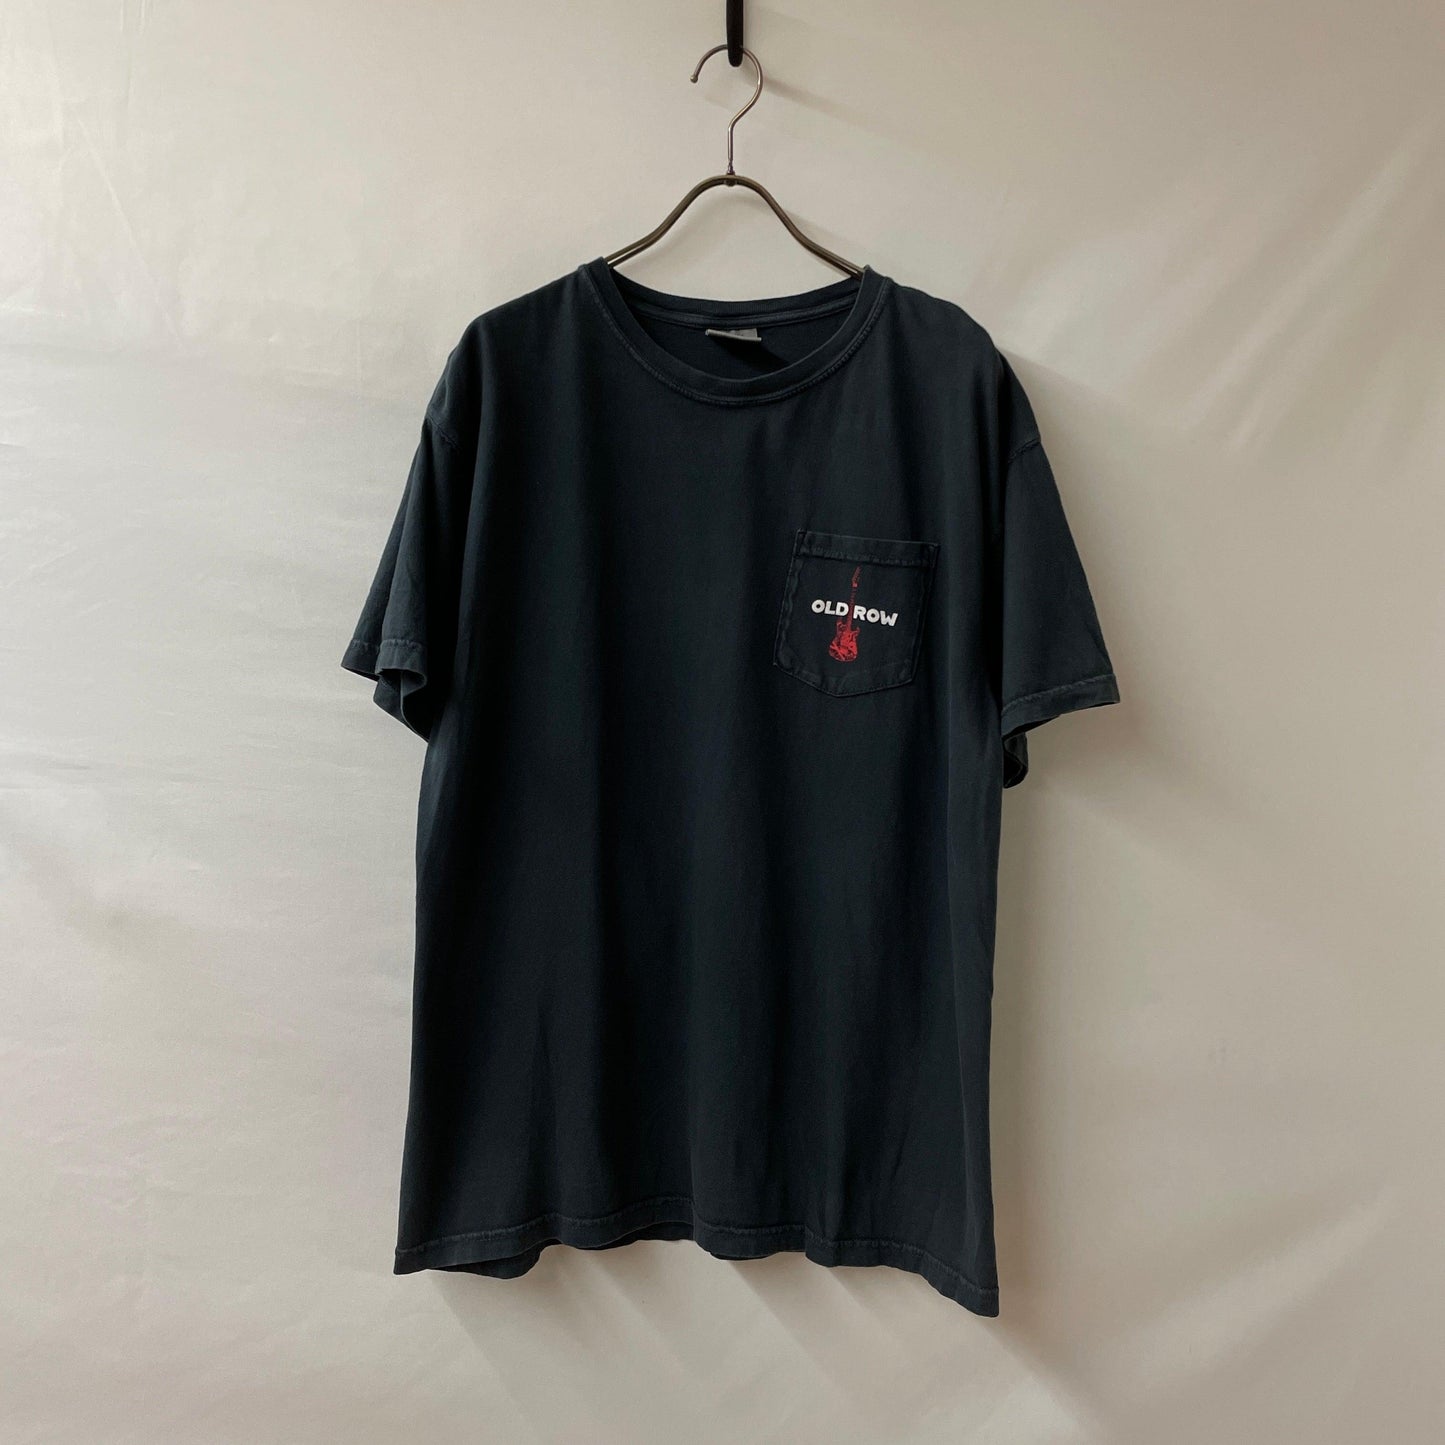 00s Tee COMFORT COLORS SIZE:M T-shirt